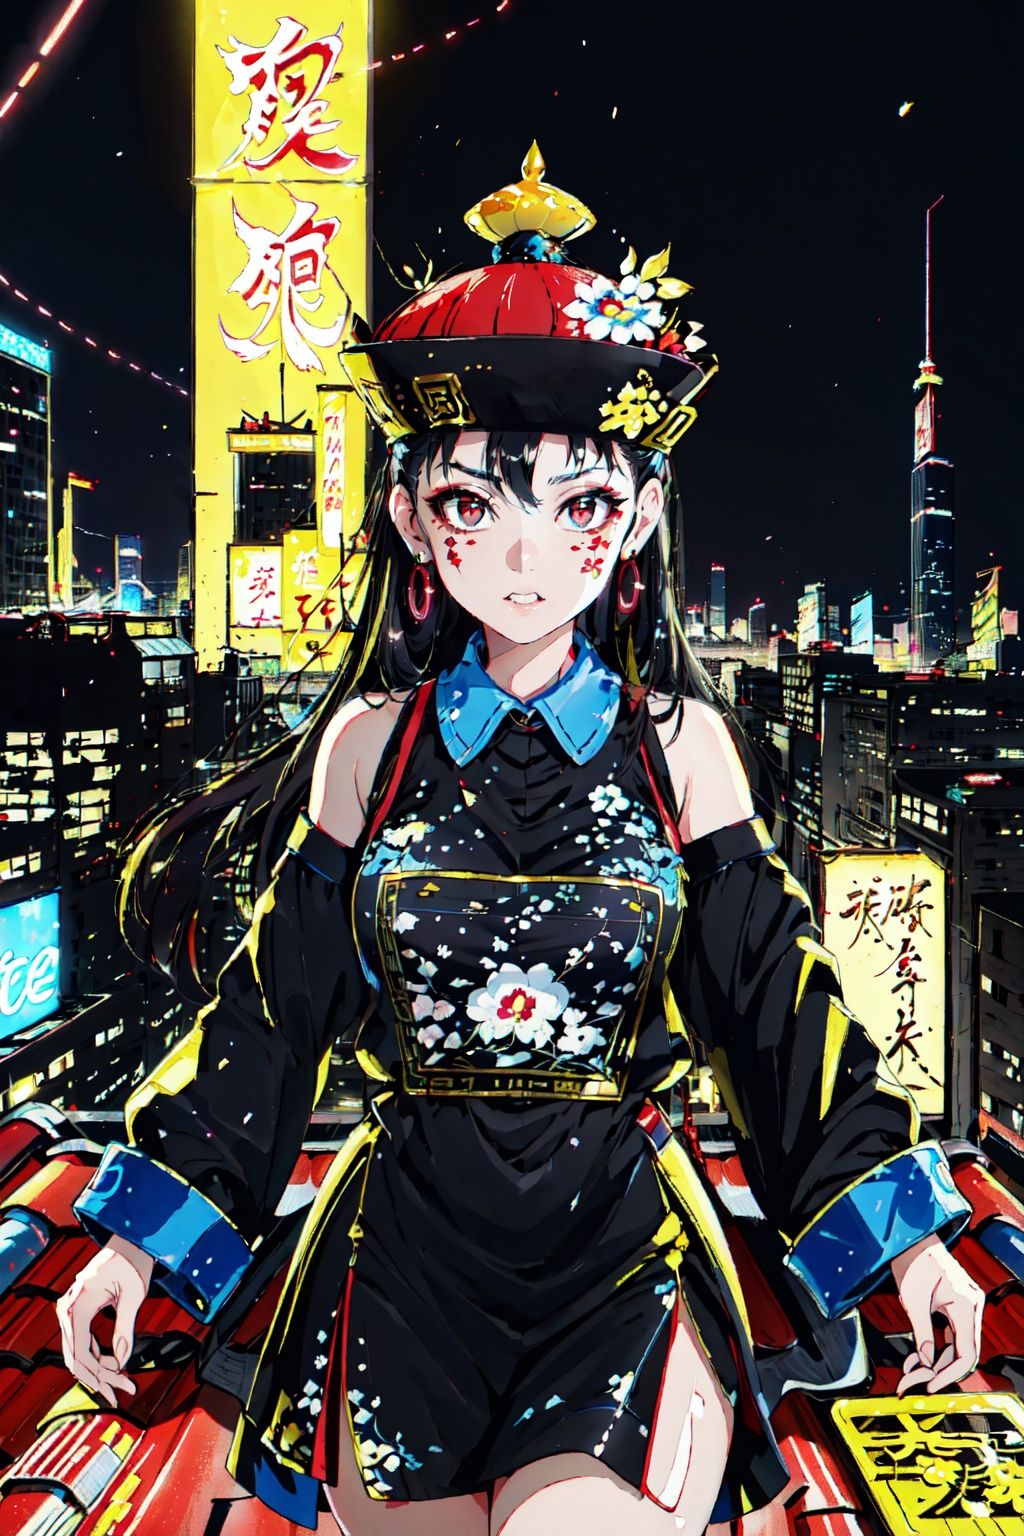 ((masterpiece)),((best quality)),8k,high detailed,ultra-detailed,upper body,((huangfu pape on head)),1girl,jiangshigirl costume,breast,bare shoulder,painted face,makeup,<lora:QDjiangshi:0.75>,((Urban Temptation)),((city rooftop)),(half-body portrait),(provocative),(urban setting),(skyscrapers),(neon lights),(floating pose),(motion trails),Pop mart style and neon lights surround the tempting Jiangshi in a half-body portrait on a city rooftop. The floating pose and motion trails add to the dynamic urban atmosphere,<lora:coloricher:0.5>,